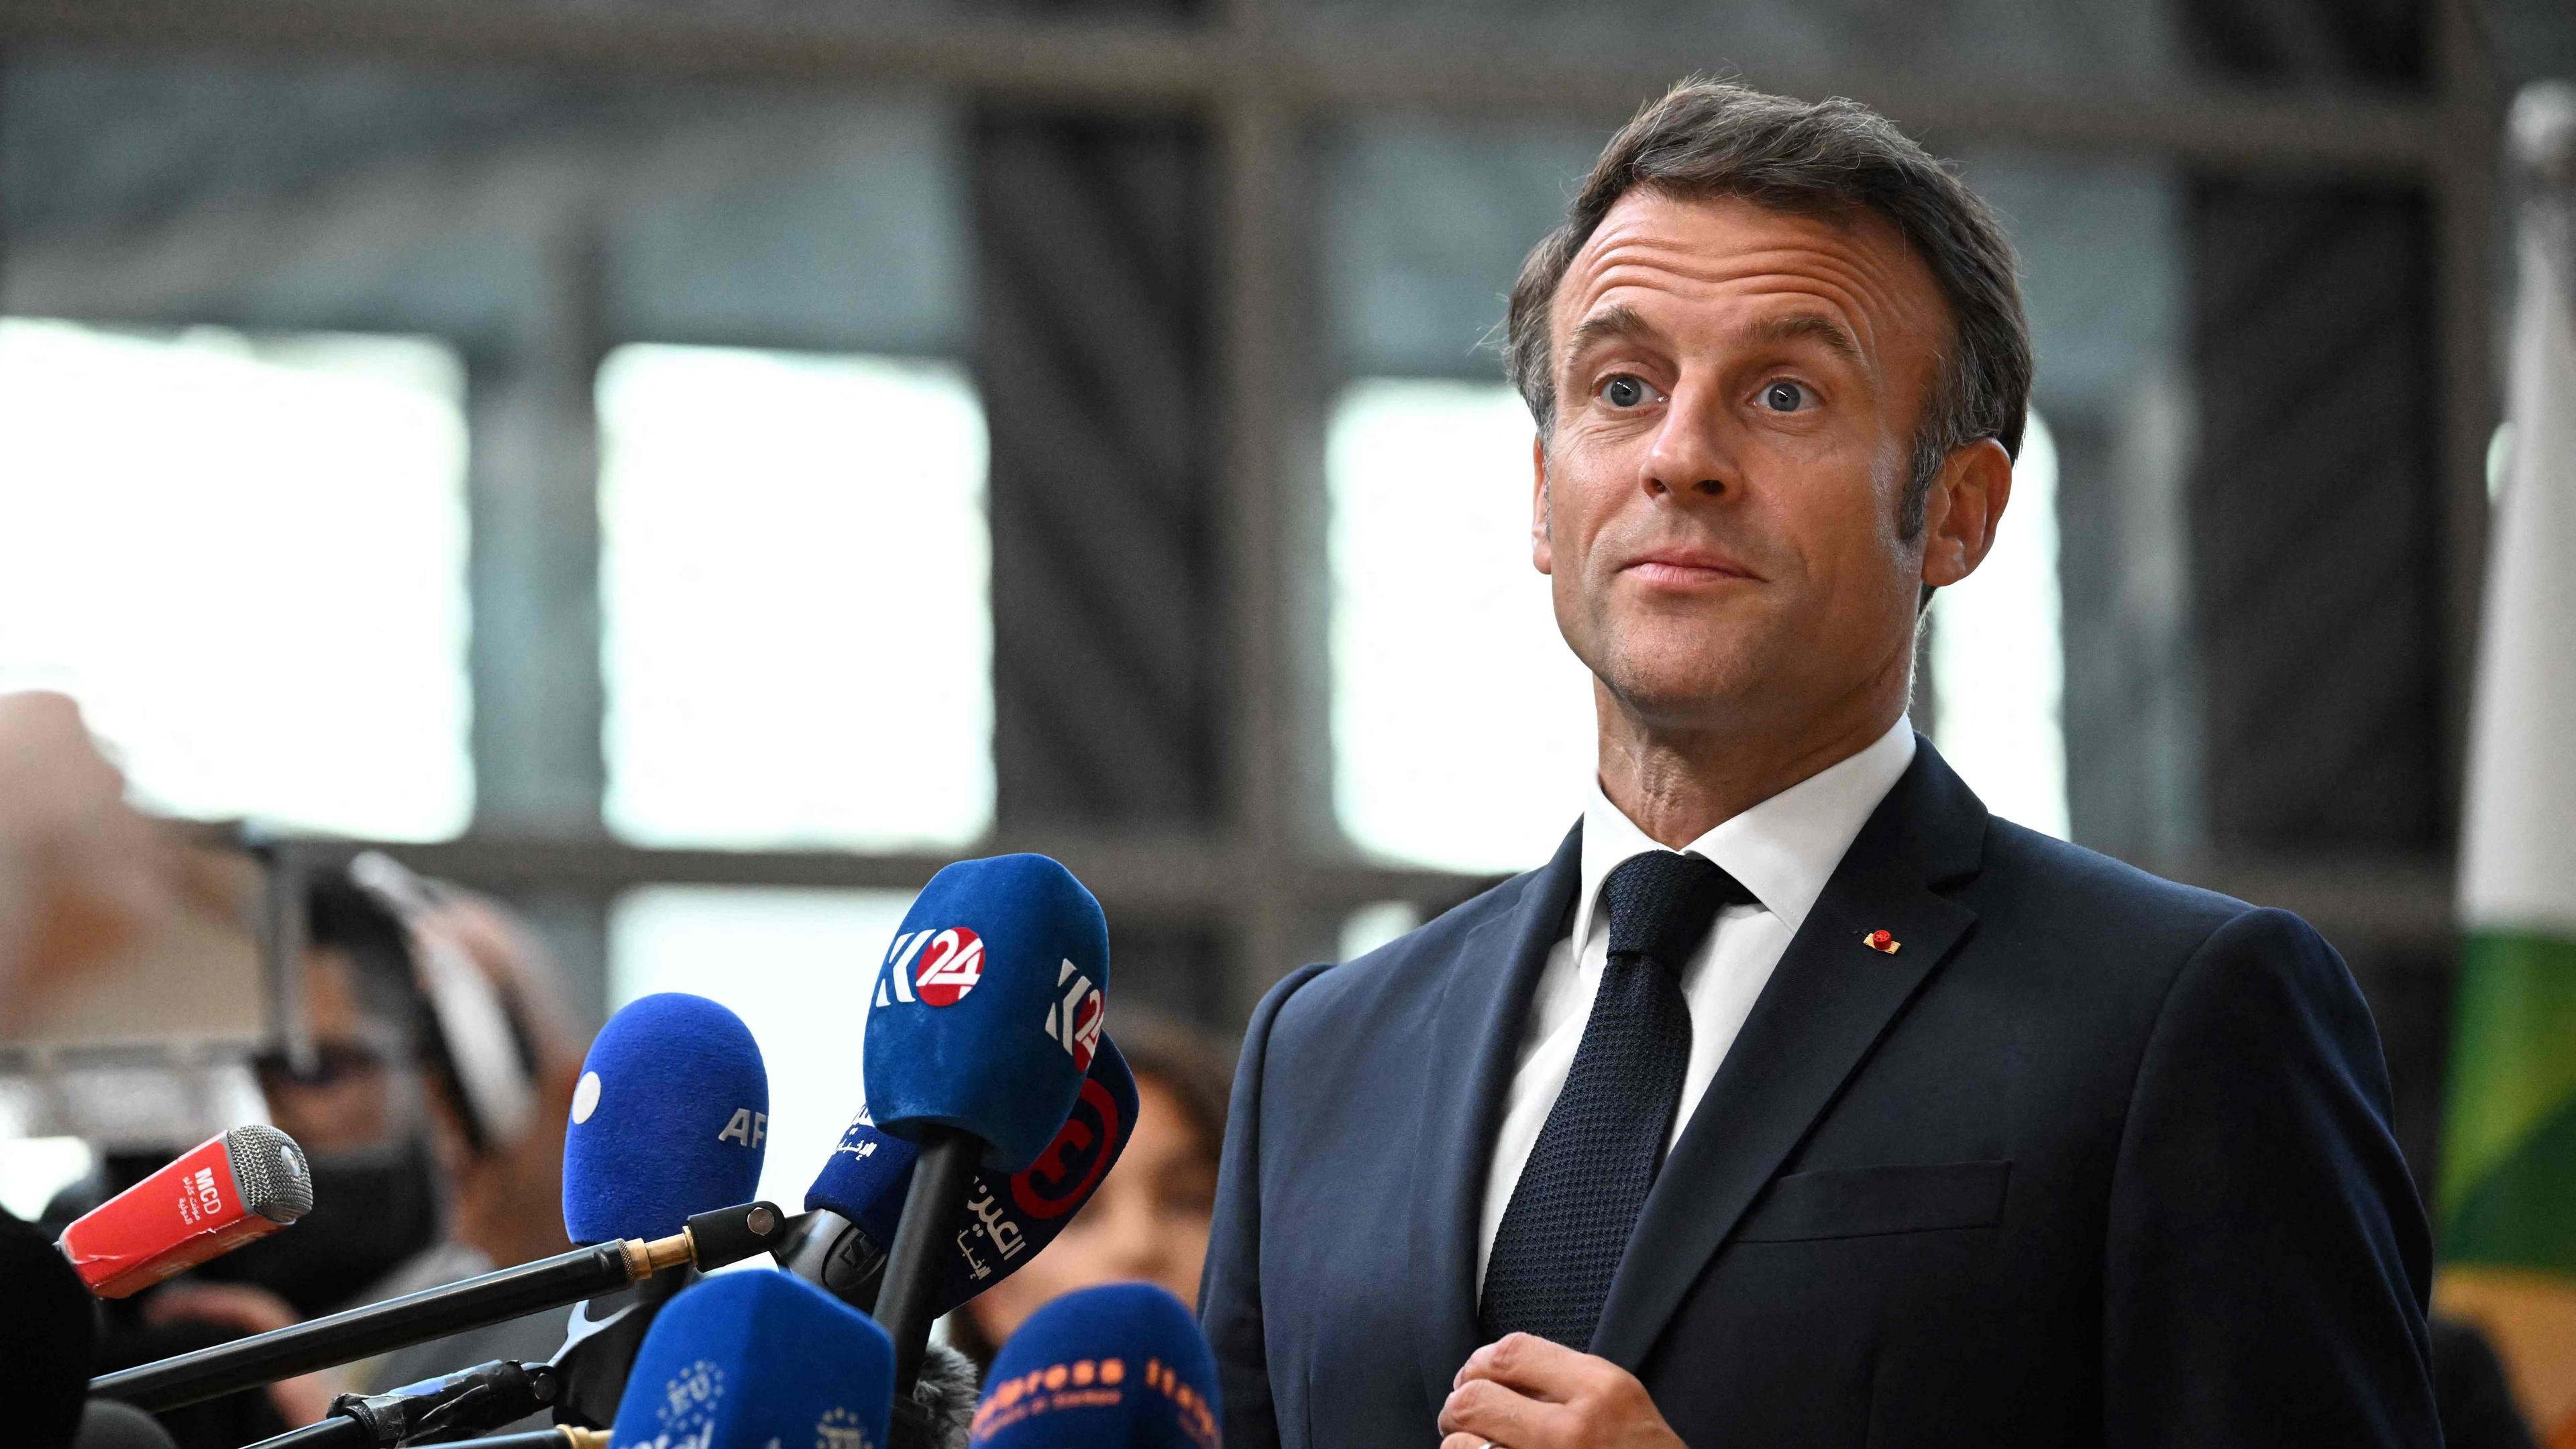 France's President Emmanuel Macron talks to the press as he leaves after attending the plenary session of a summit of the European Union and the Community of Latin American and Caribbean States (EU-CELAC) at the European Council Building in Brussels on July 18, 2023. (Photo by Emmanuel DUNAND / AFP)